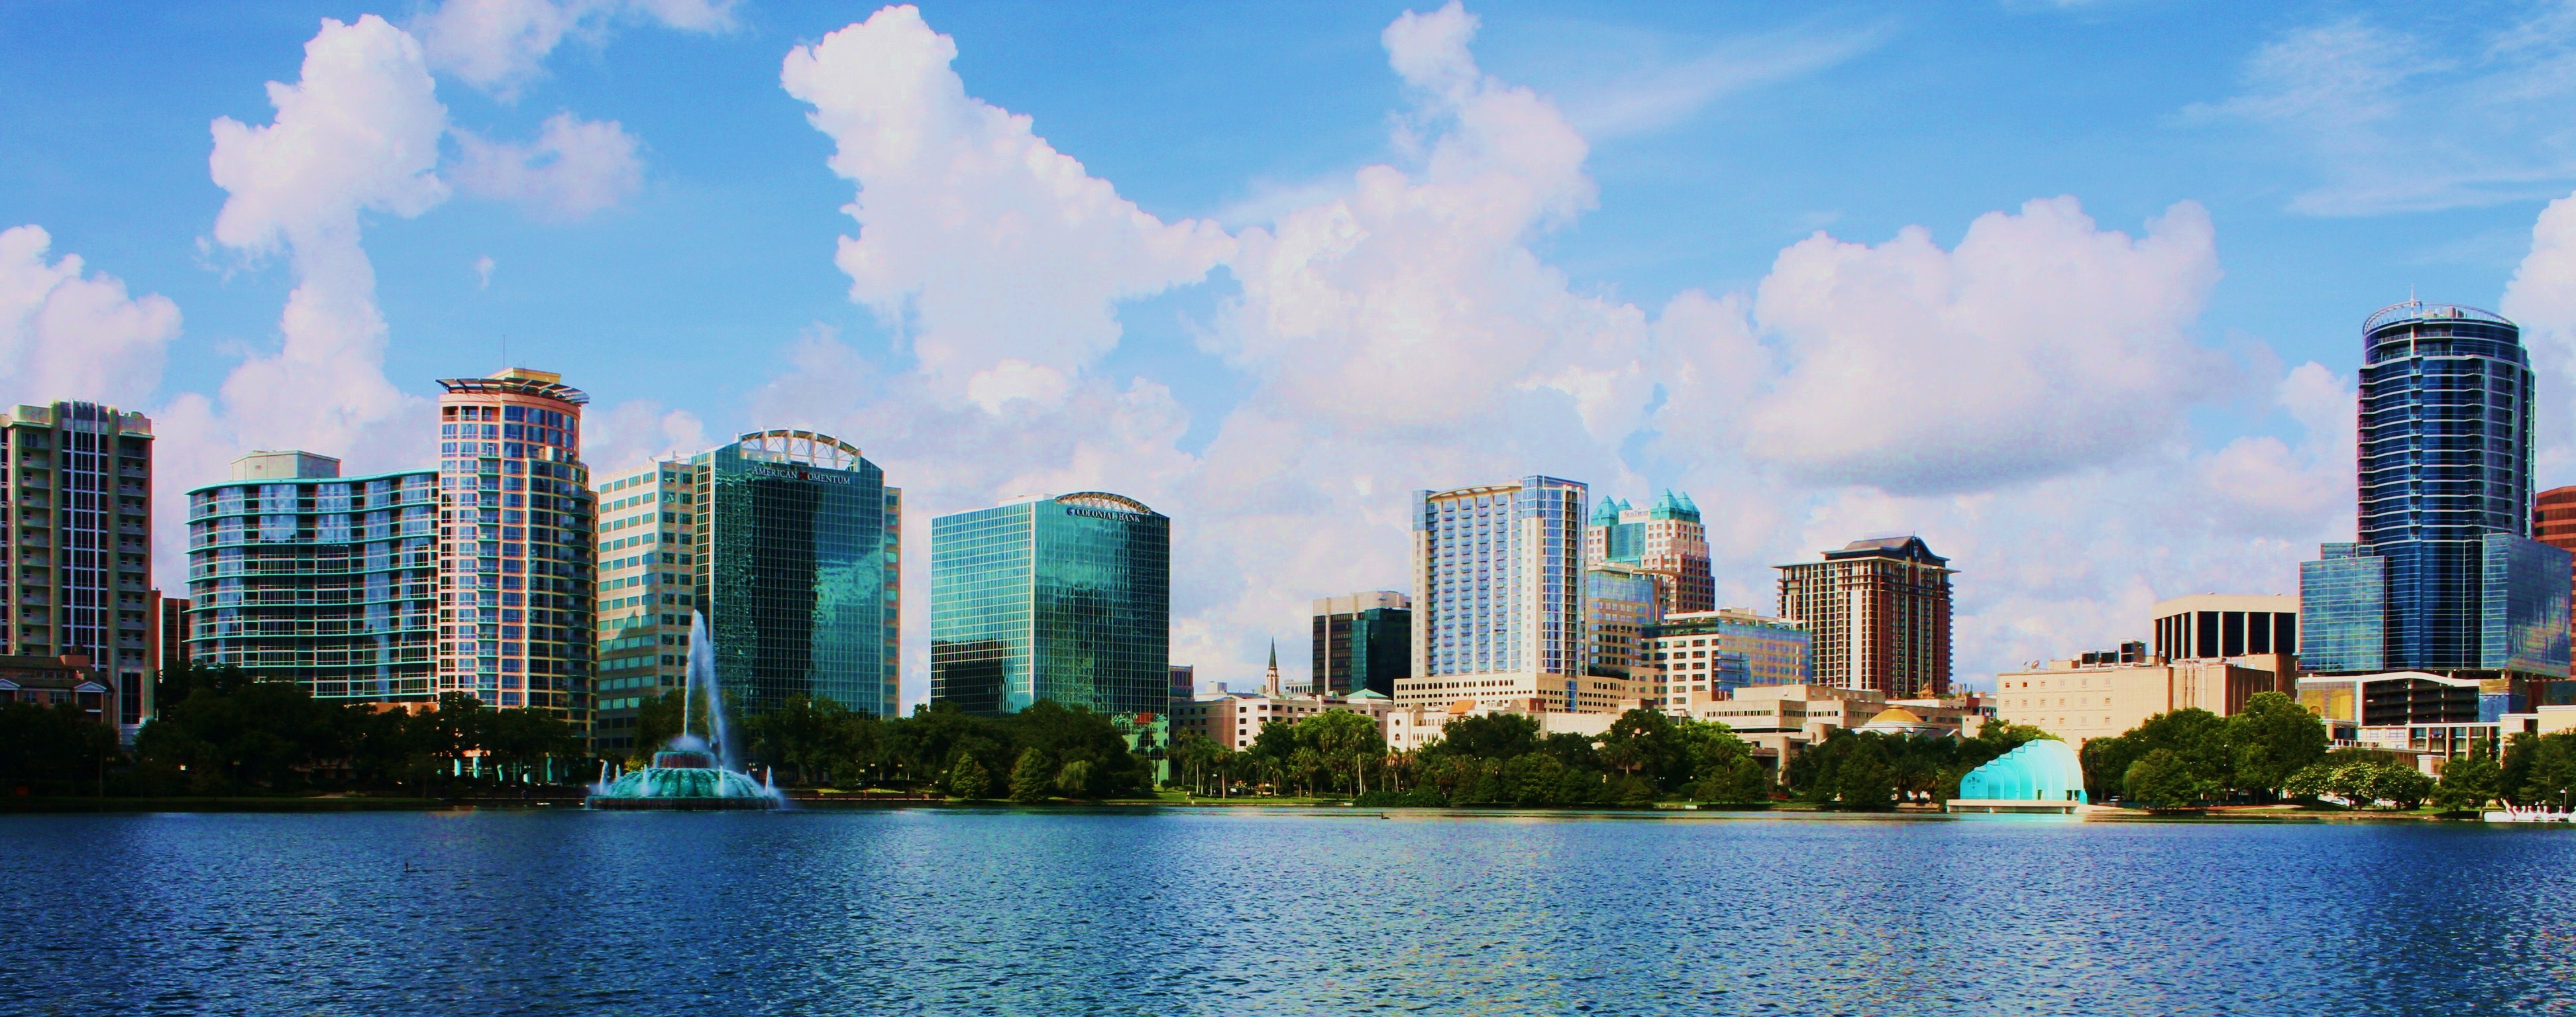 DOWNTOWN ORLANDO HOMES FOR SALE